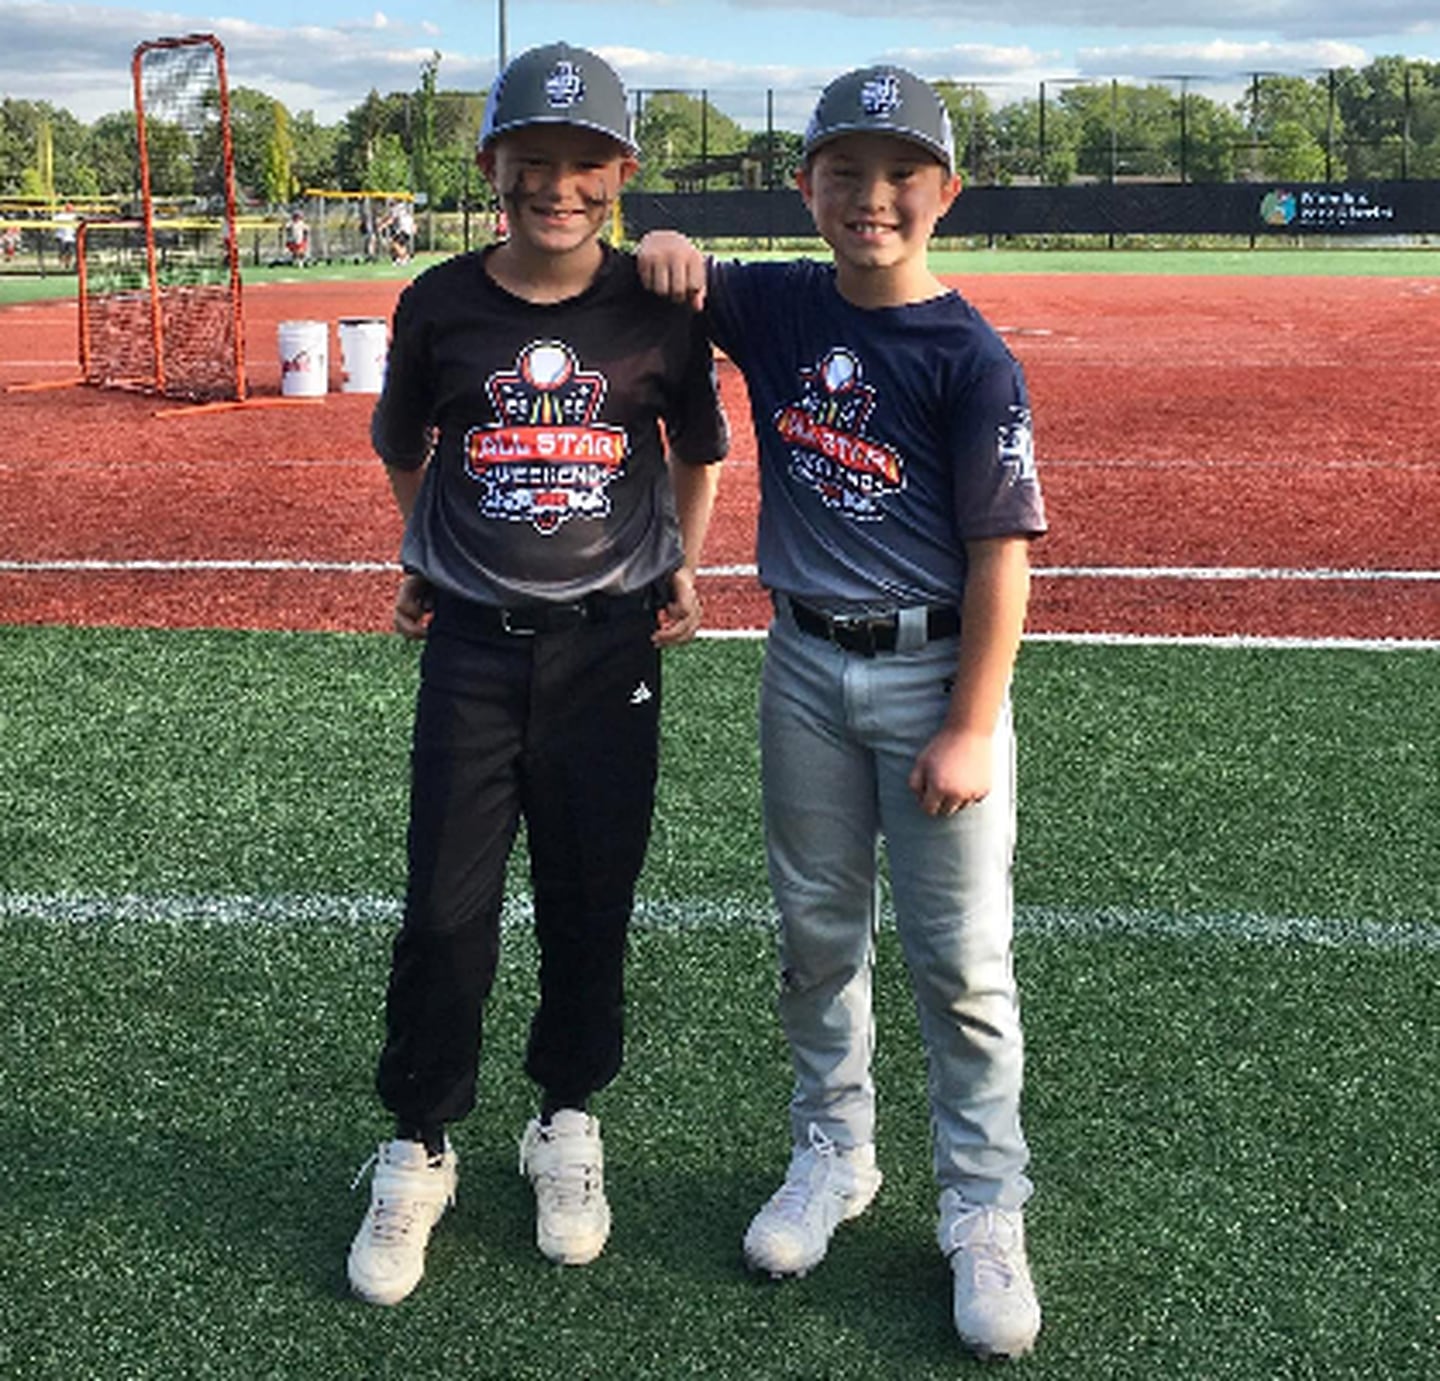 Lukas Albright, 9, of Sterling, left, and Zayden Pritchard, also 9, of Rock Falls, are local Little League players who participated in the JP Sports All-Star Weekend in Wheeling, July 30-31. Lukas, son of Emily Higley and Codtey Albright, won MVP for being the fastest player; his team also won the tournament championship. Zayden, played on a different team, was invited to participate in the weekend because he, too, was named an MVP in a game earlier in the season. His parents are Ashlee Raymond and LJ Pritchard.